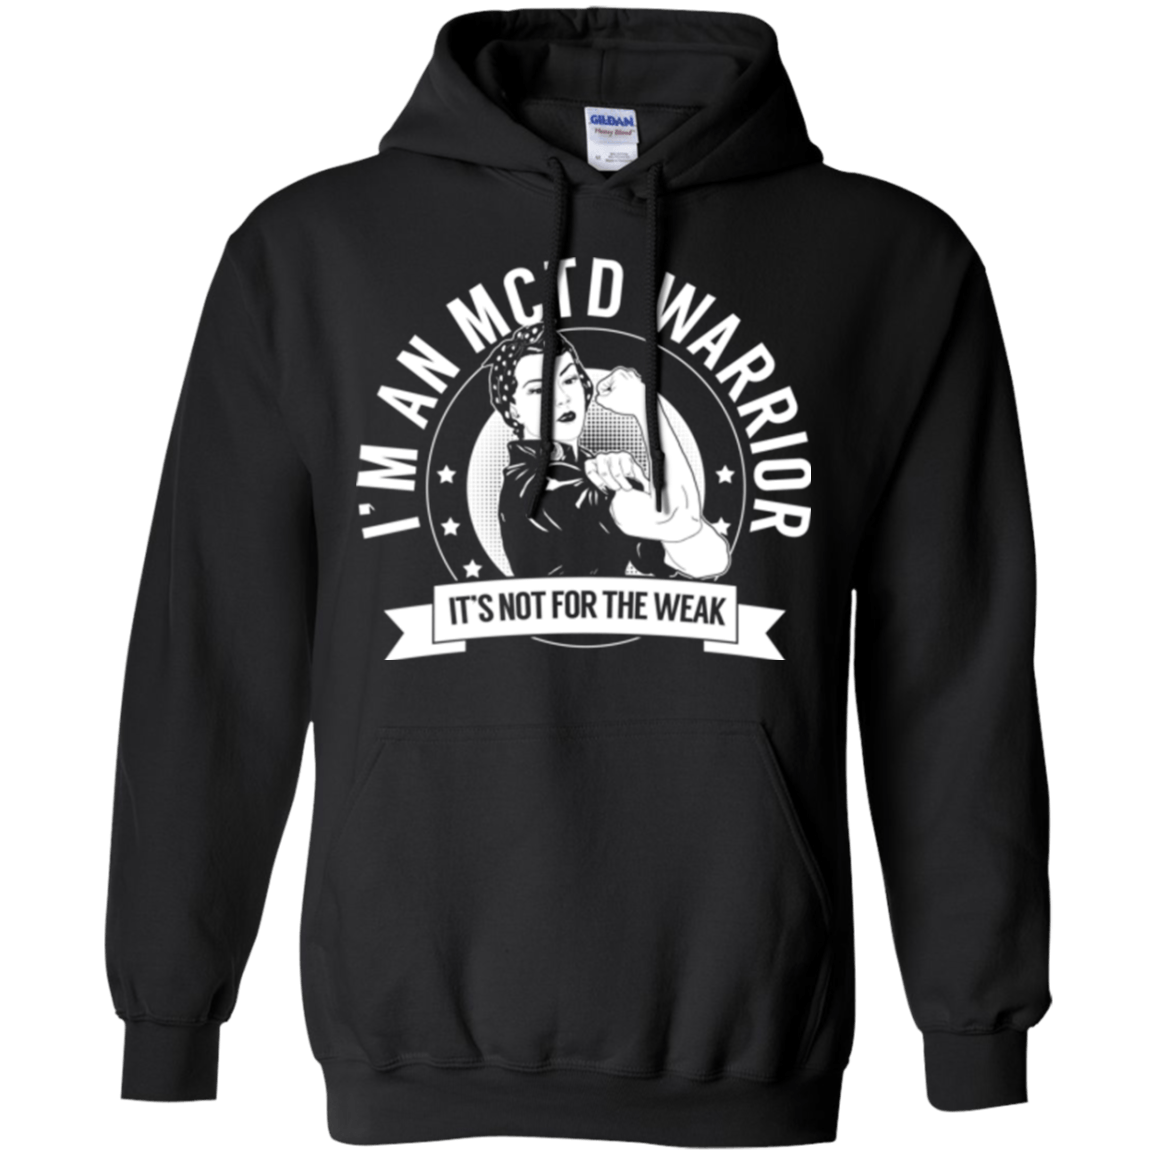 Mixed Connective Tissue Disease - MCTD Warrior Not For The Weak Pullover Hoodie 8 oz. - The Unchargeables